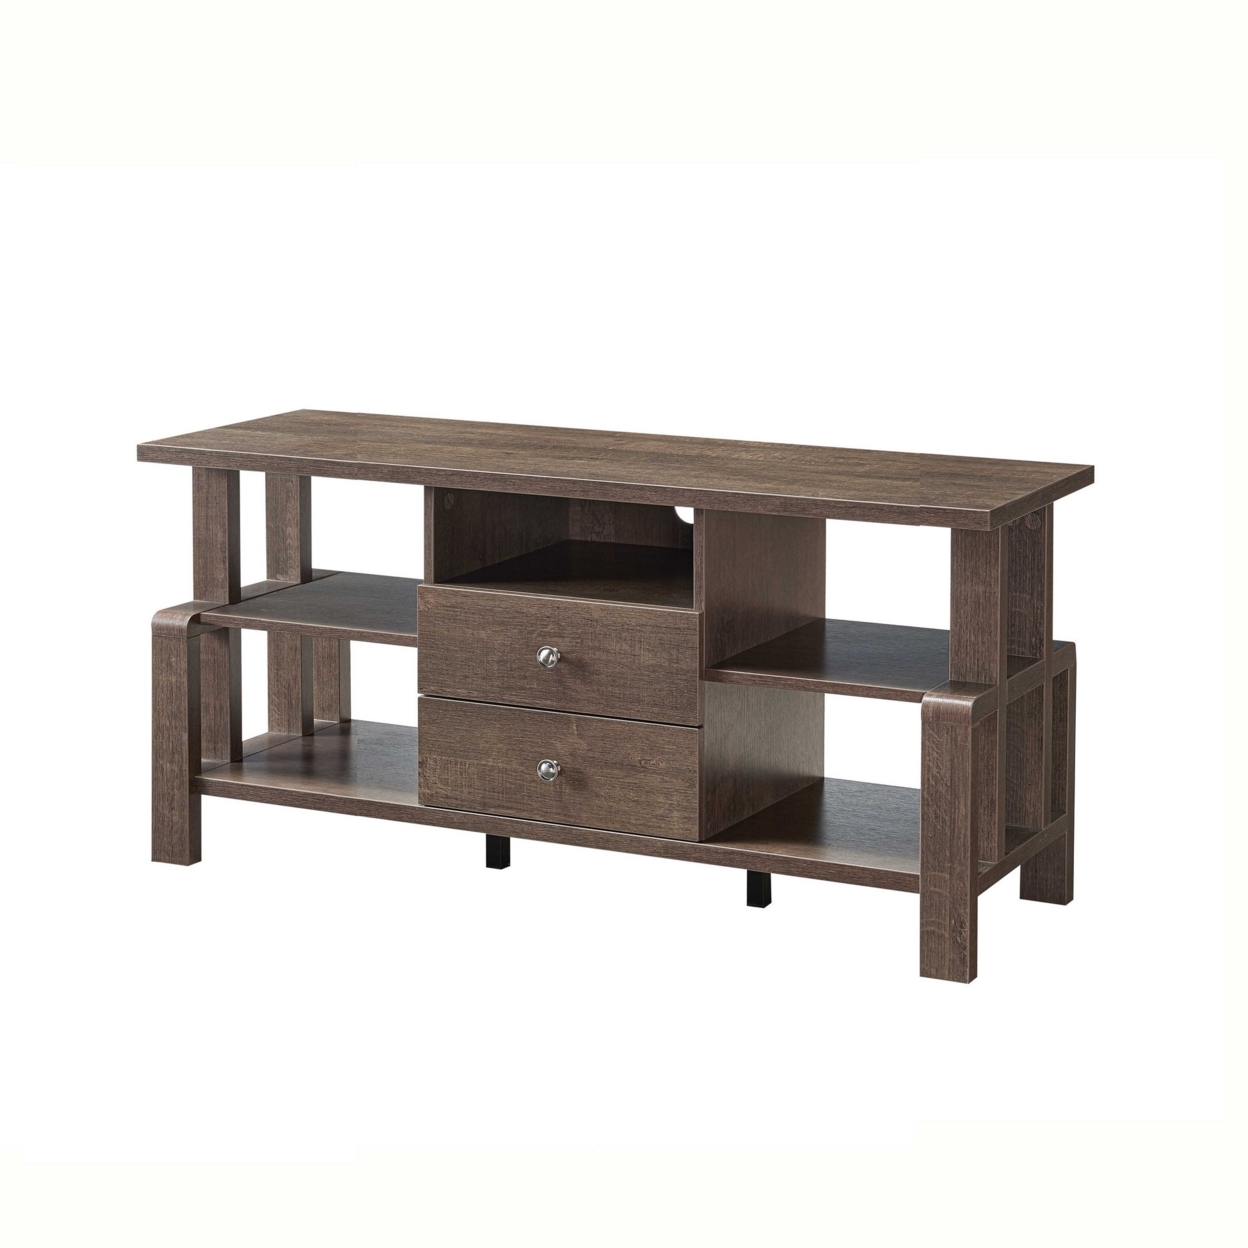 TV Stand With 4 Wooden Shelves And 2 Drawers, Brown- Saltoro Sherpi